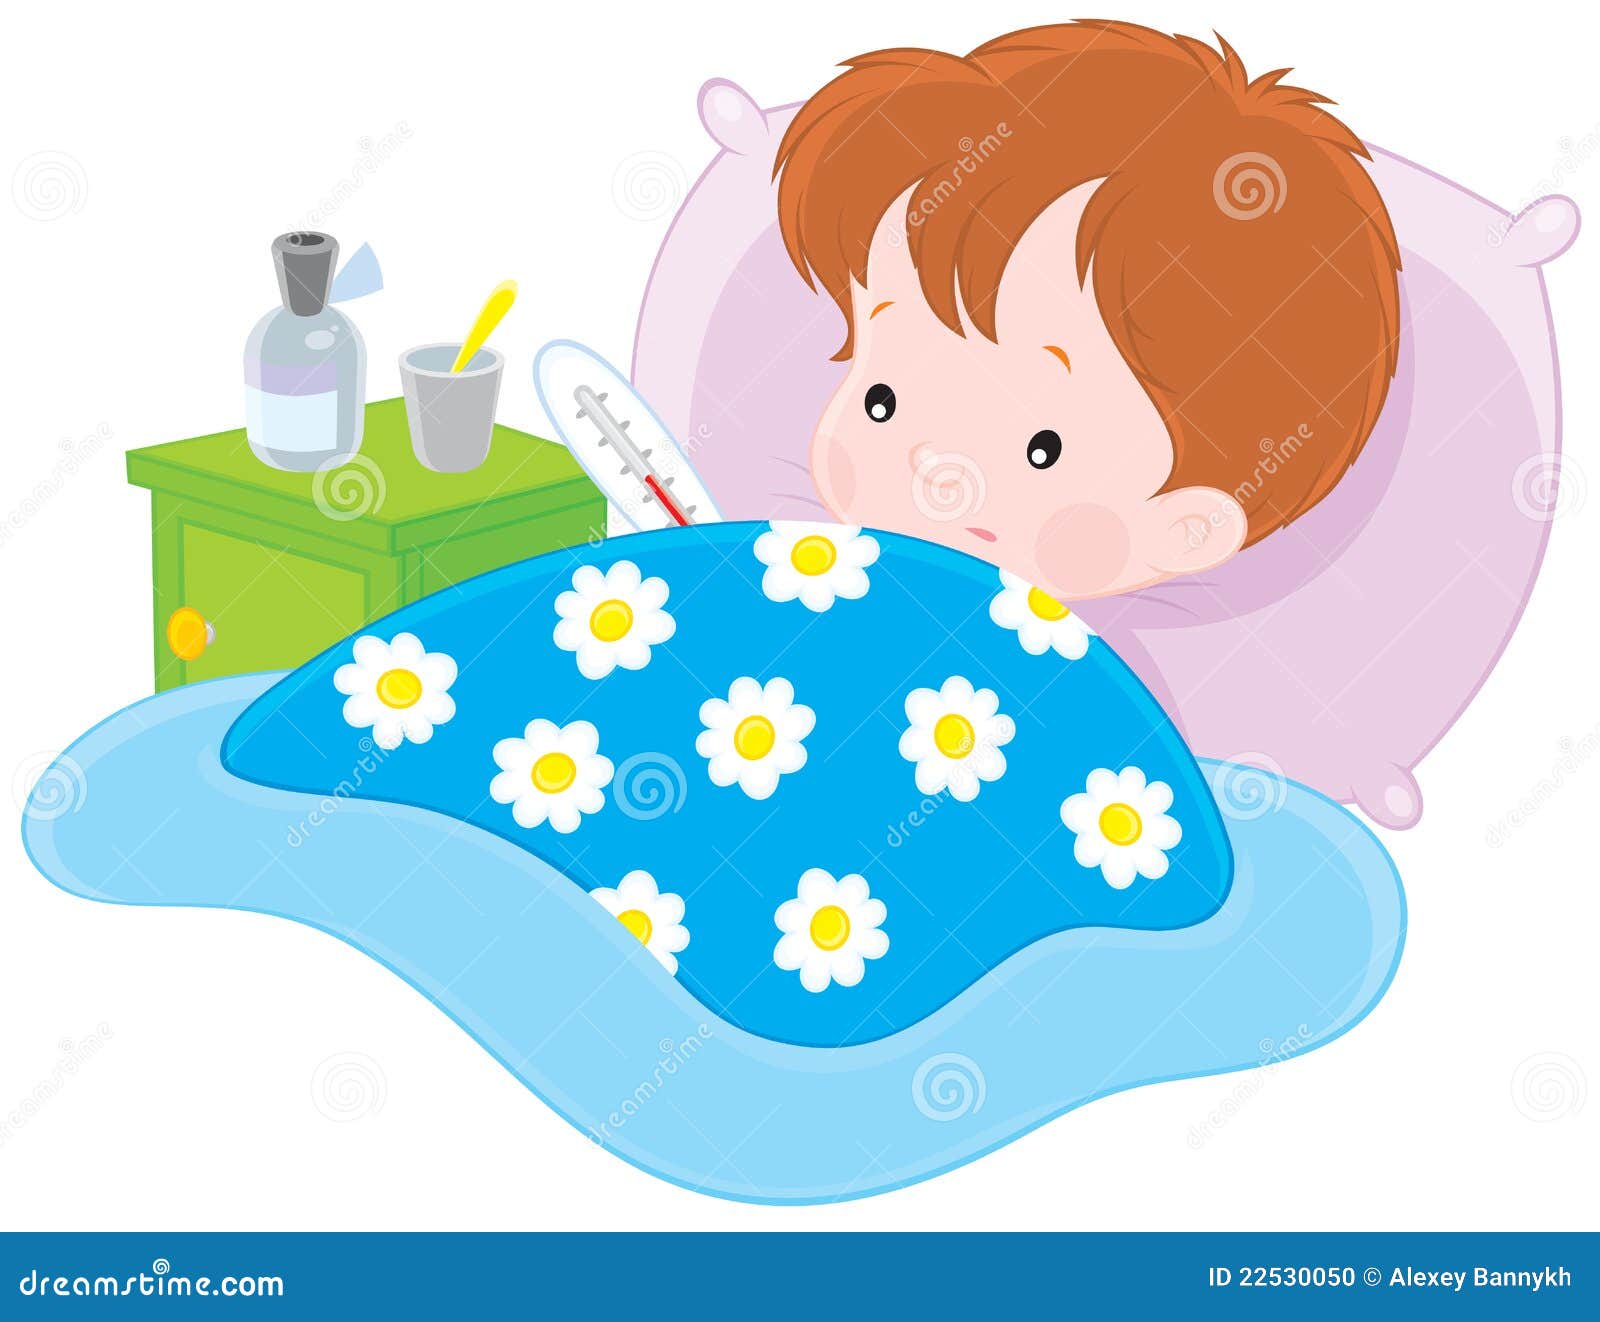 ... clip-art illustration of a sick boy lying with a thermometer in a bed